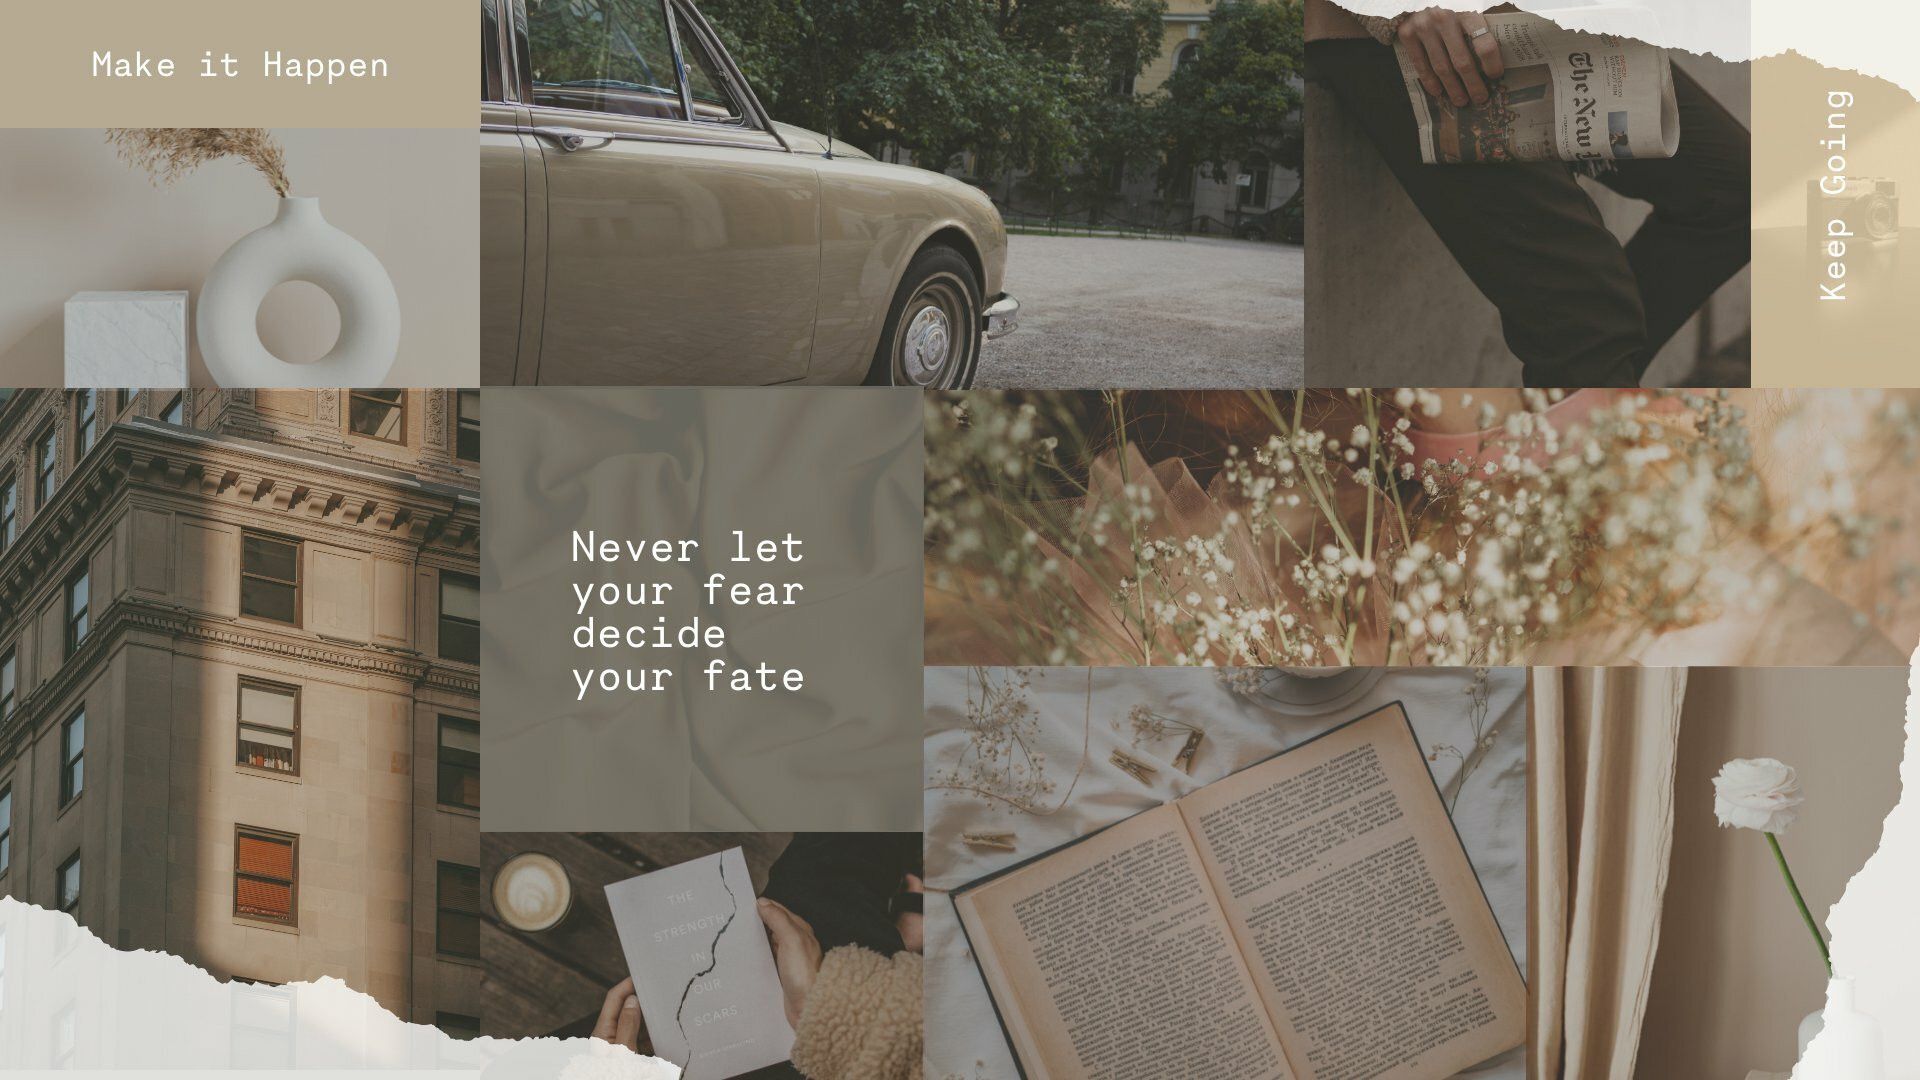 A collage of images including a car, flowers, books, and a person reading. - Desktop